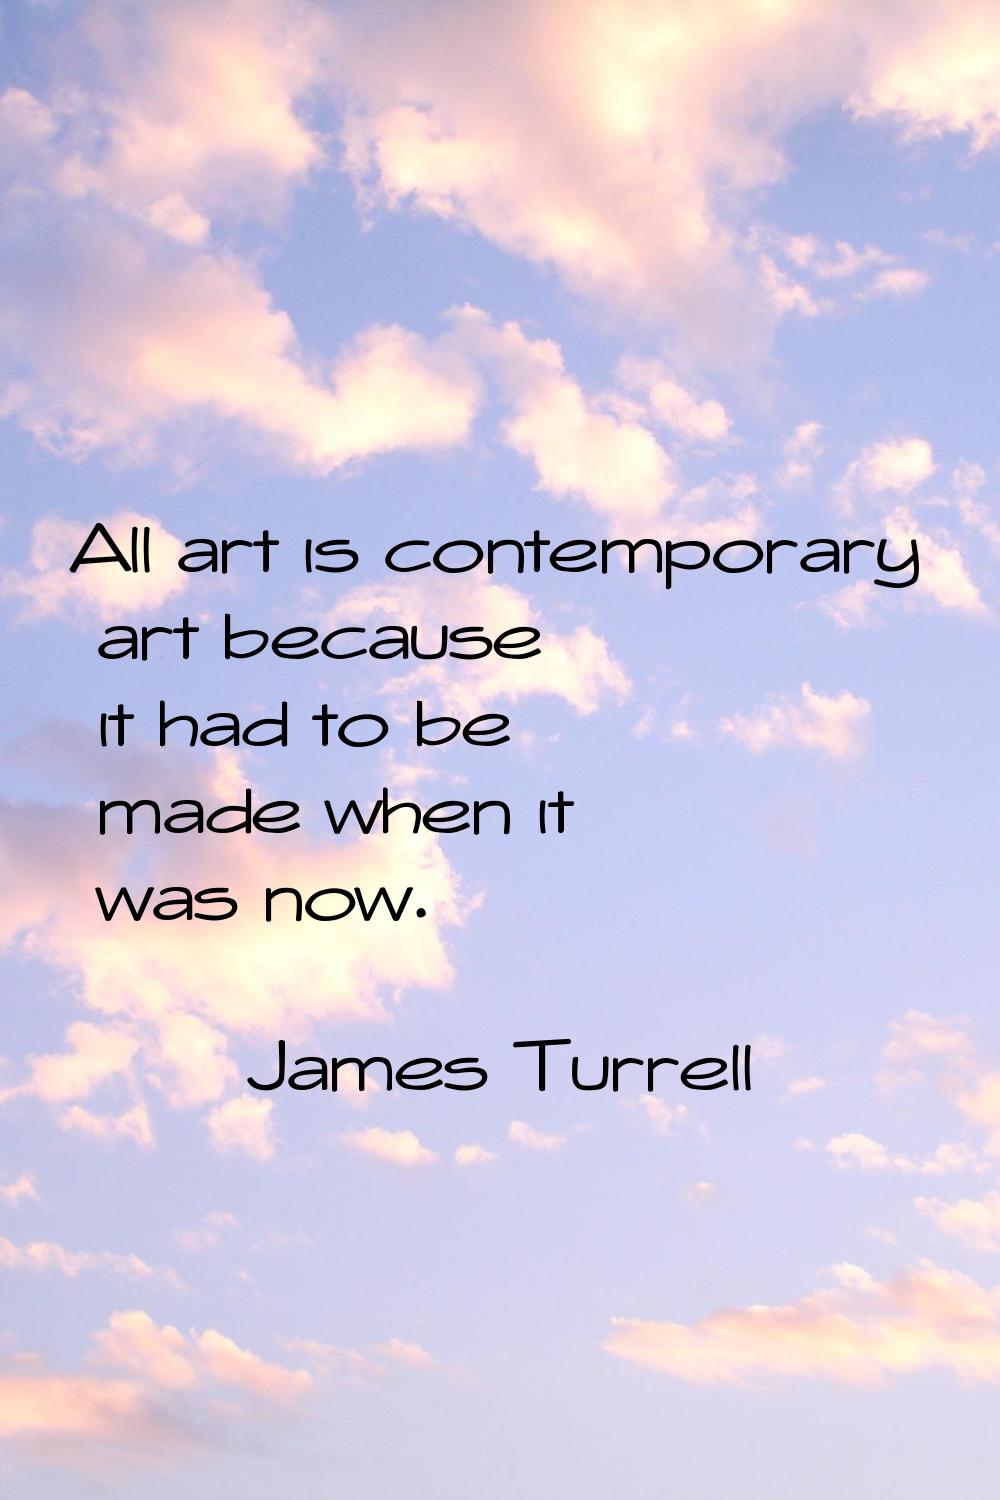 All art is contemporary art because it had to be made when it was now.